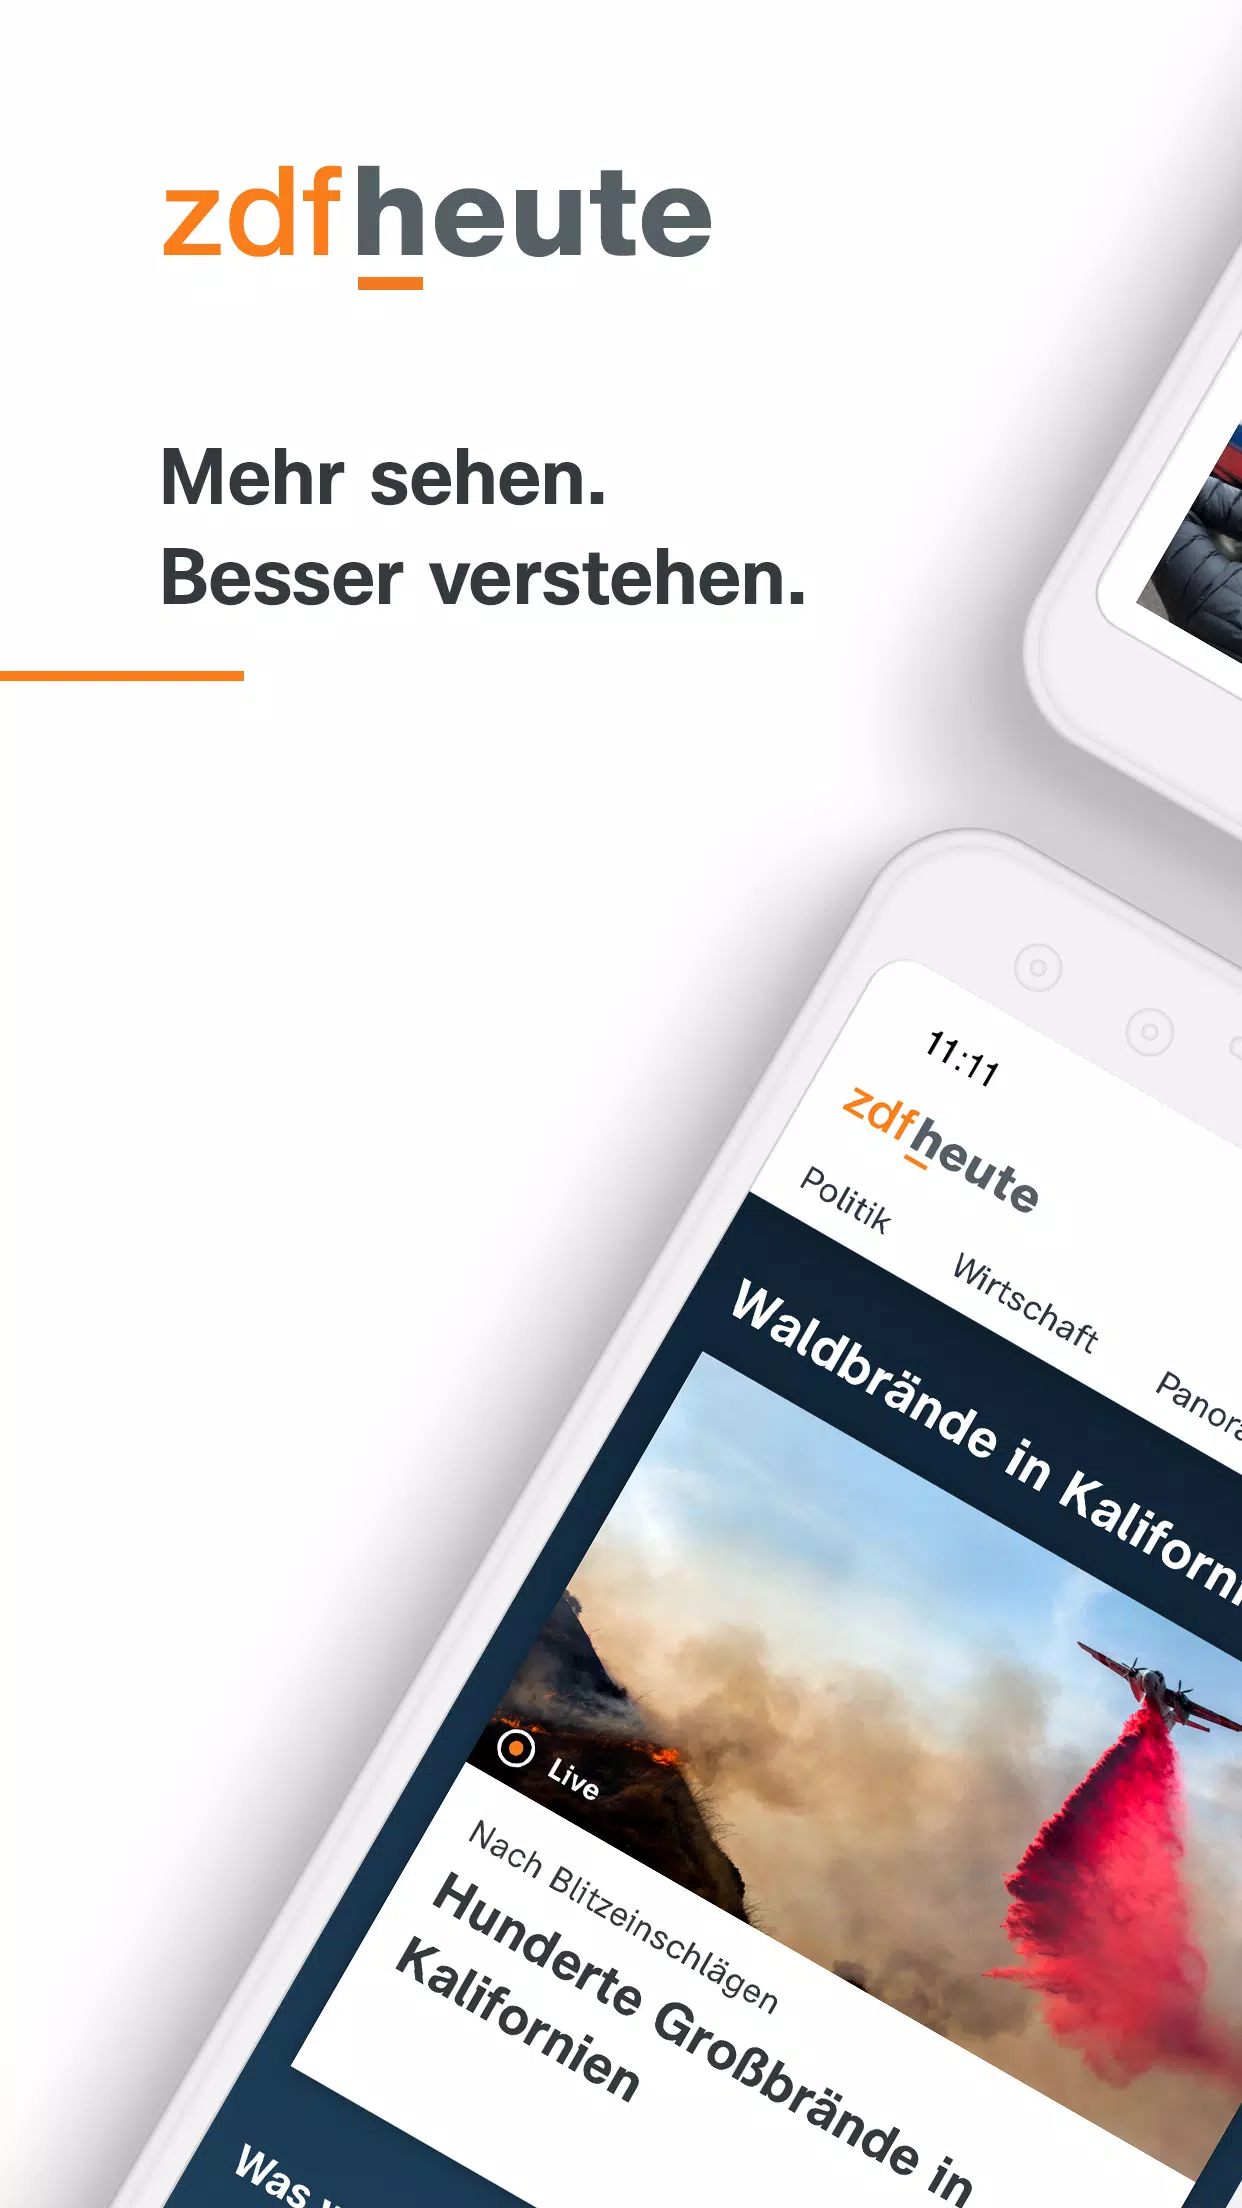 ZDFheute for Android - APK Download